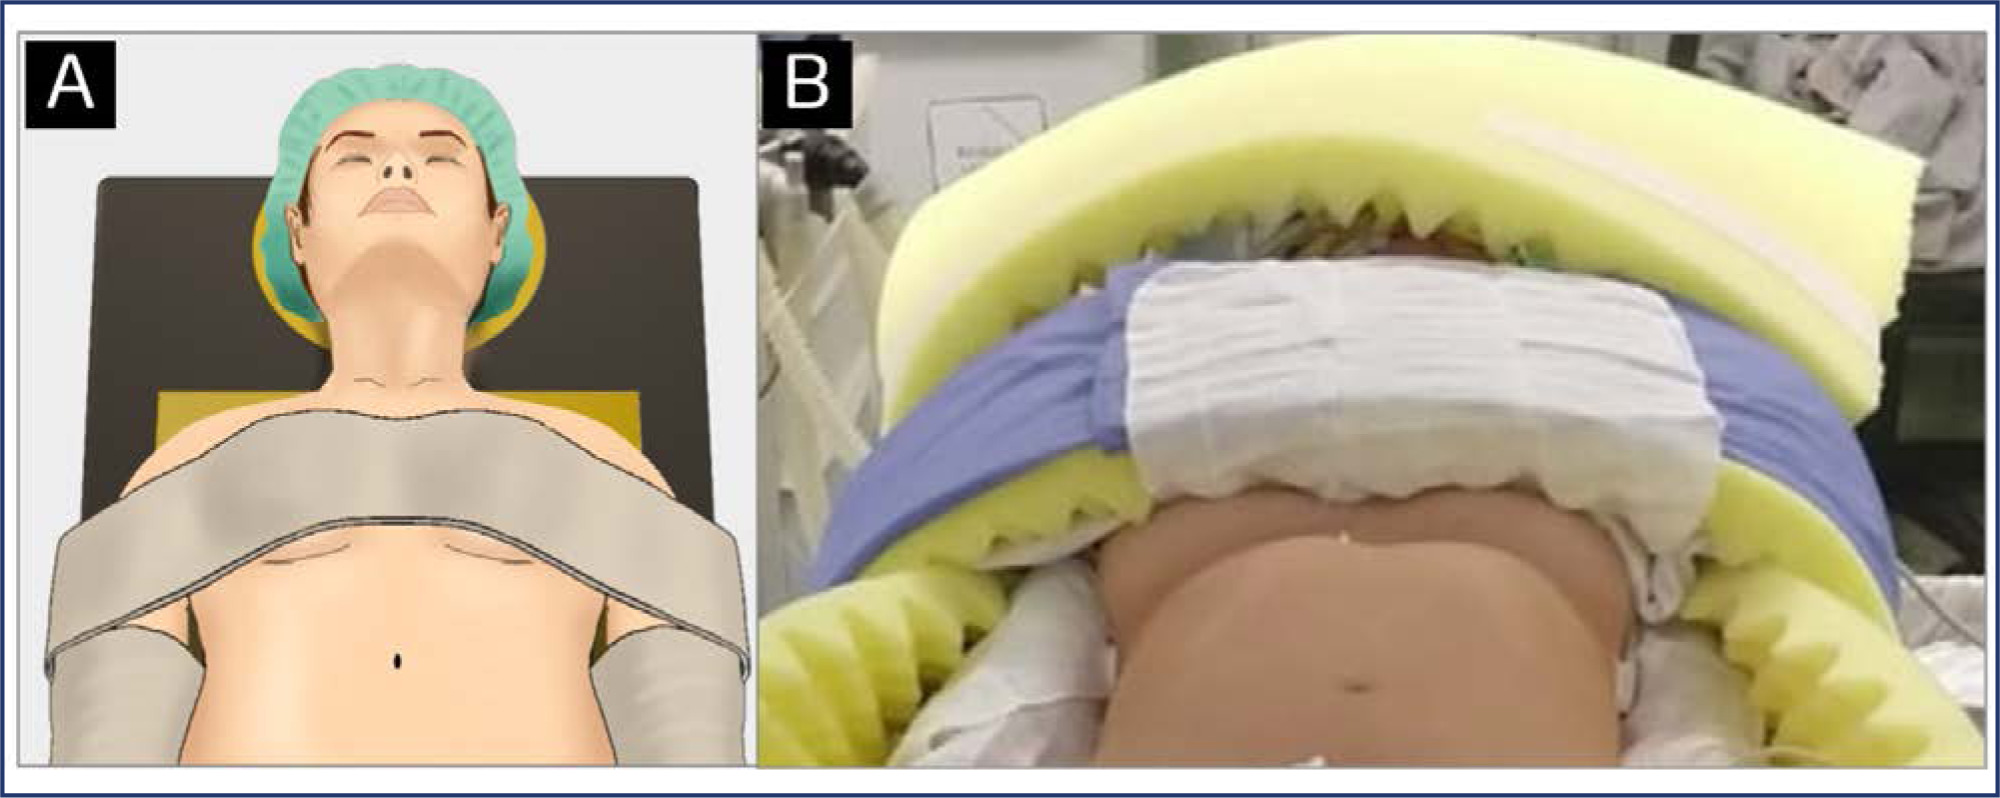 Patient positioning in minimally invasive gynecologic surgery: strategies to prevent injuries and improve outcomes